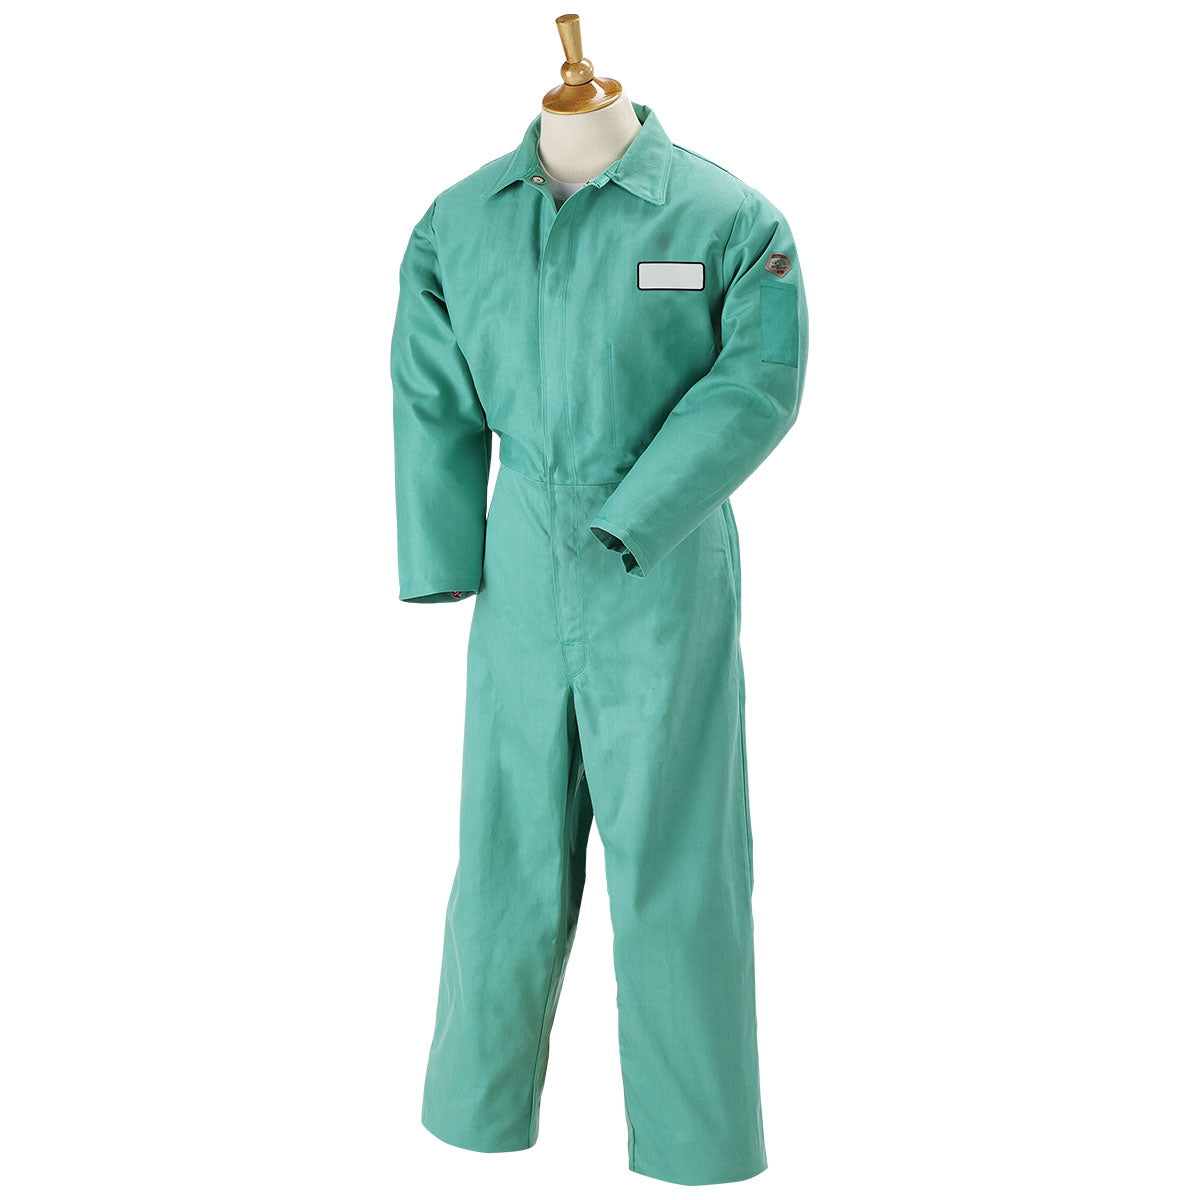 Revco Black Stallion 9oz Green FR Cotton Coveralls for sale (F9-32CA/PT)  Buy at Welding Supplies from IOC